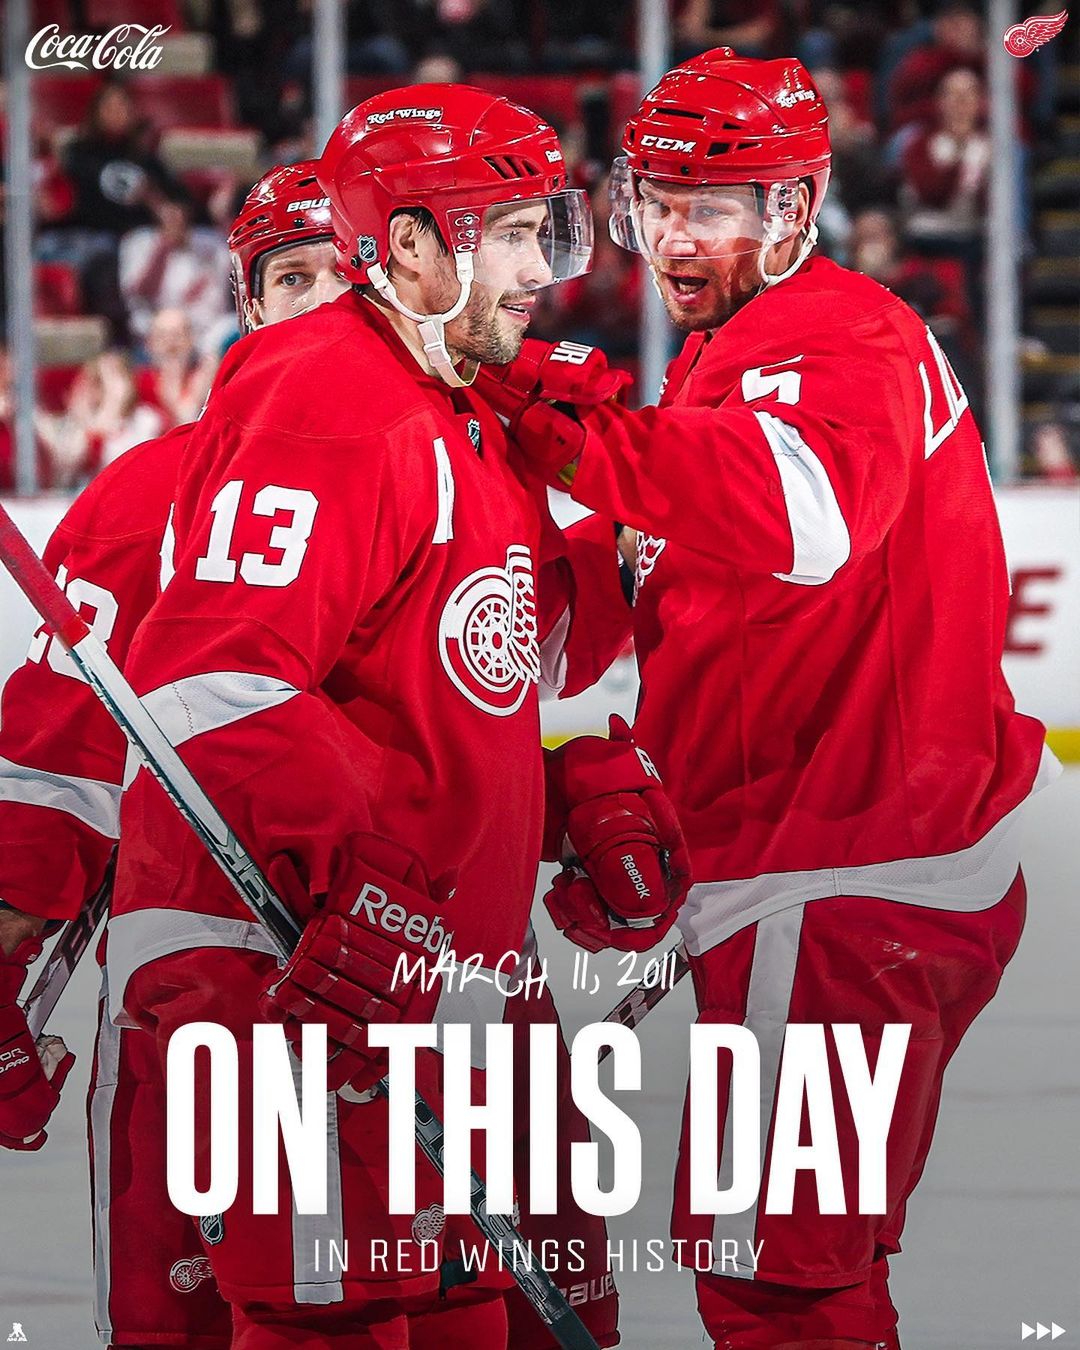 #otd in 2011: Trailing 1-0 with :25 left in regulation, Nick Lidstrom tied the g...